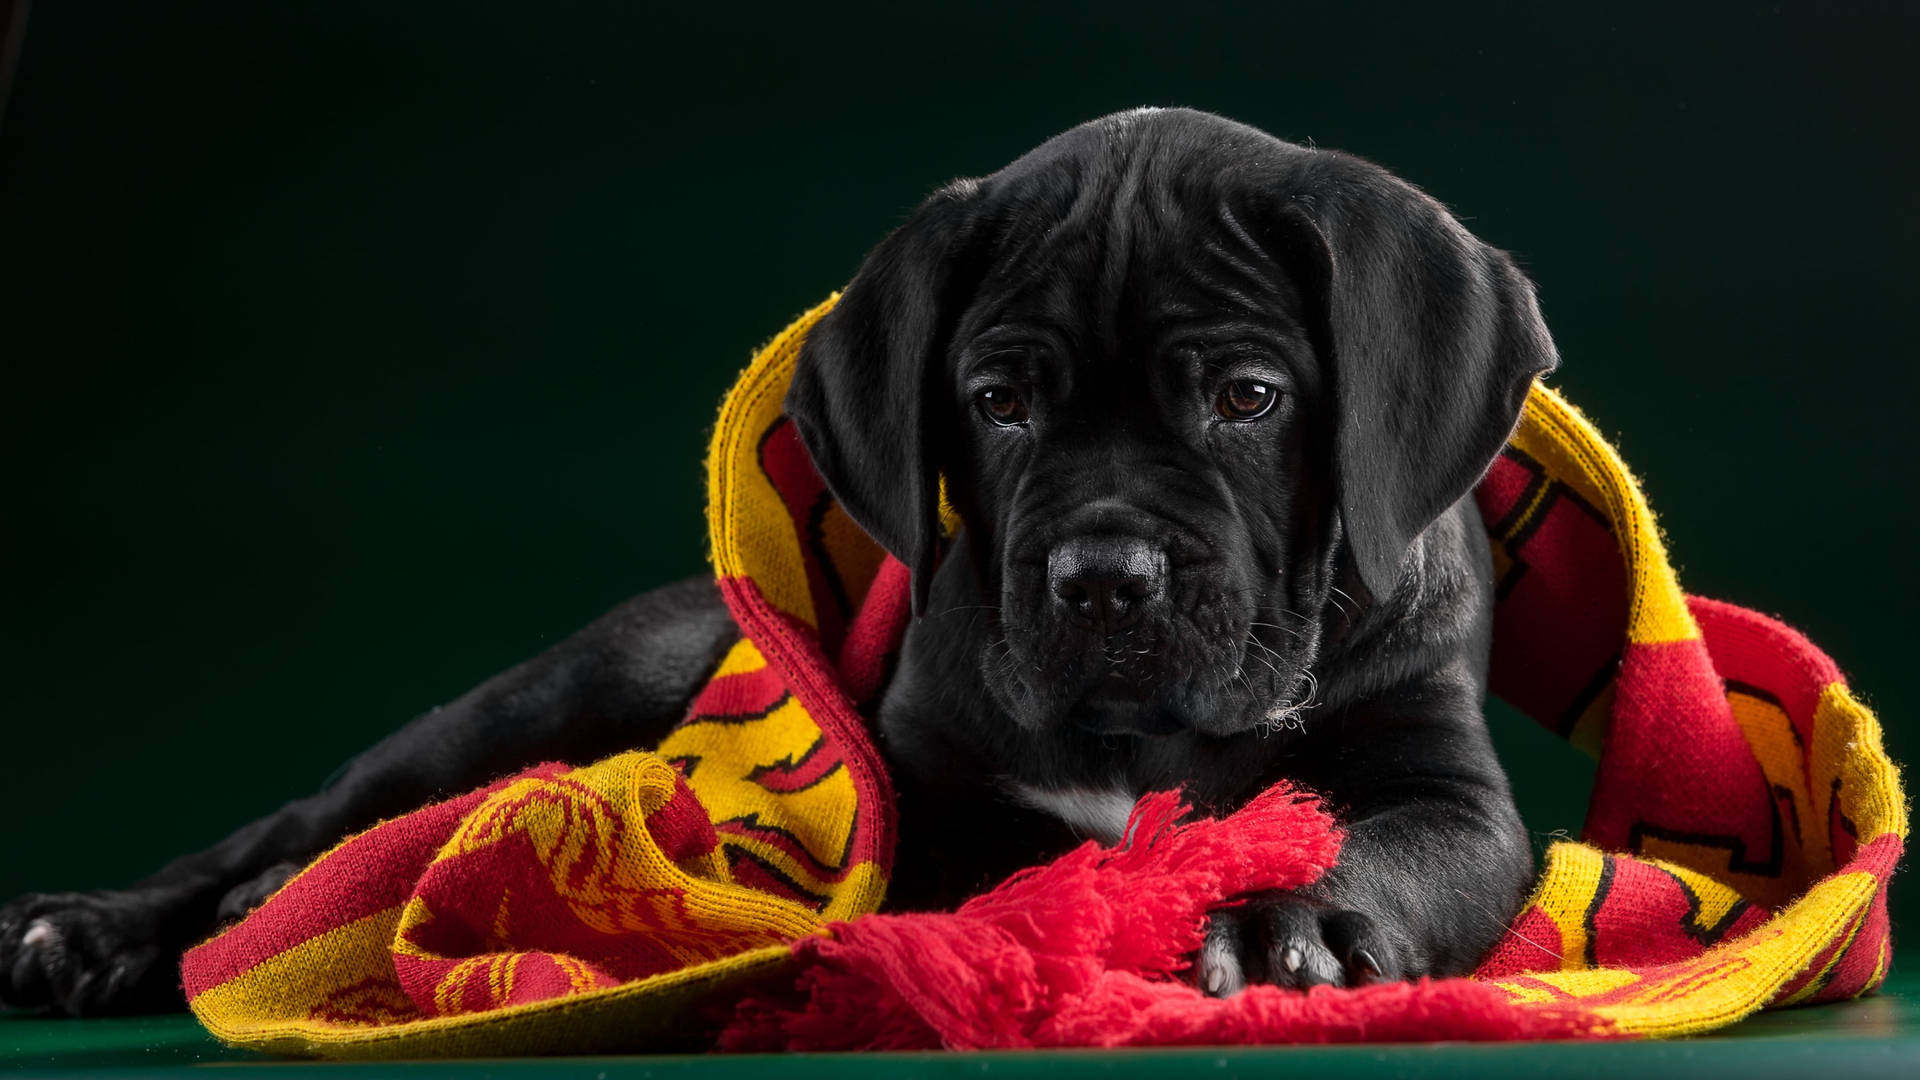 Cane Corso Puppy Scarf Model Background